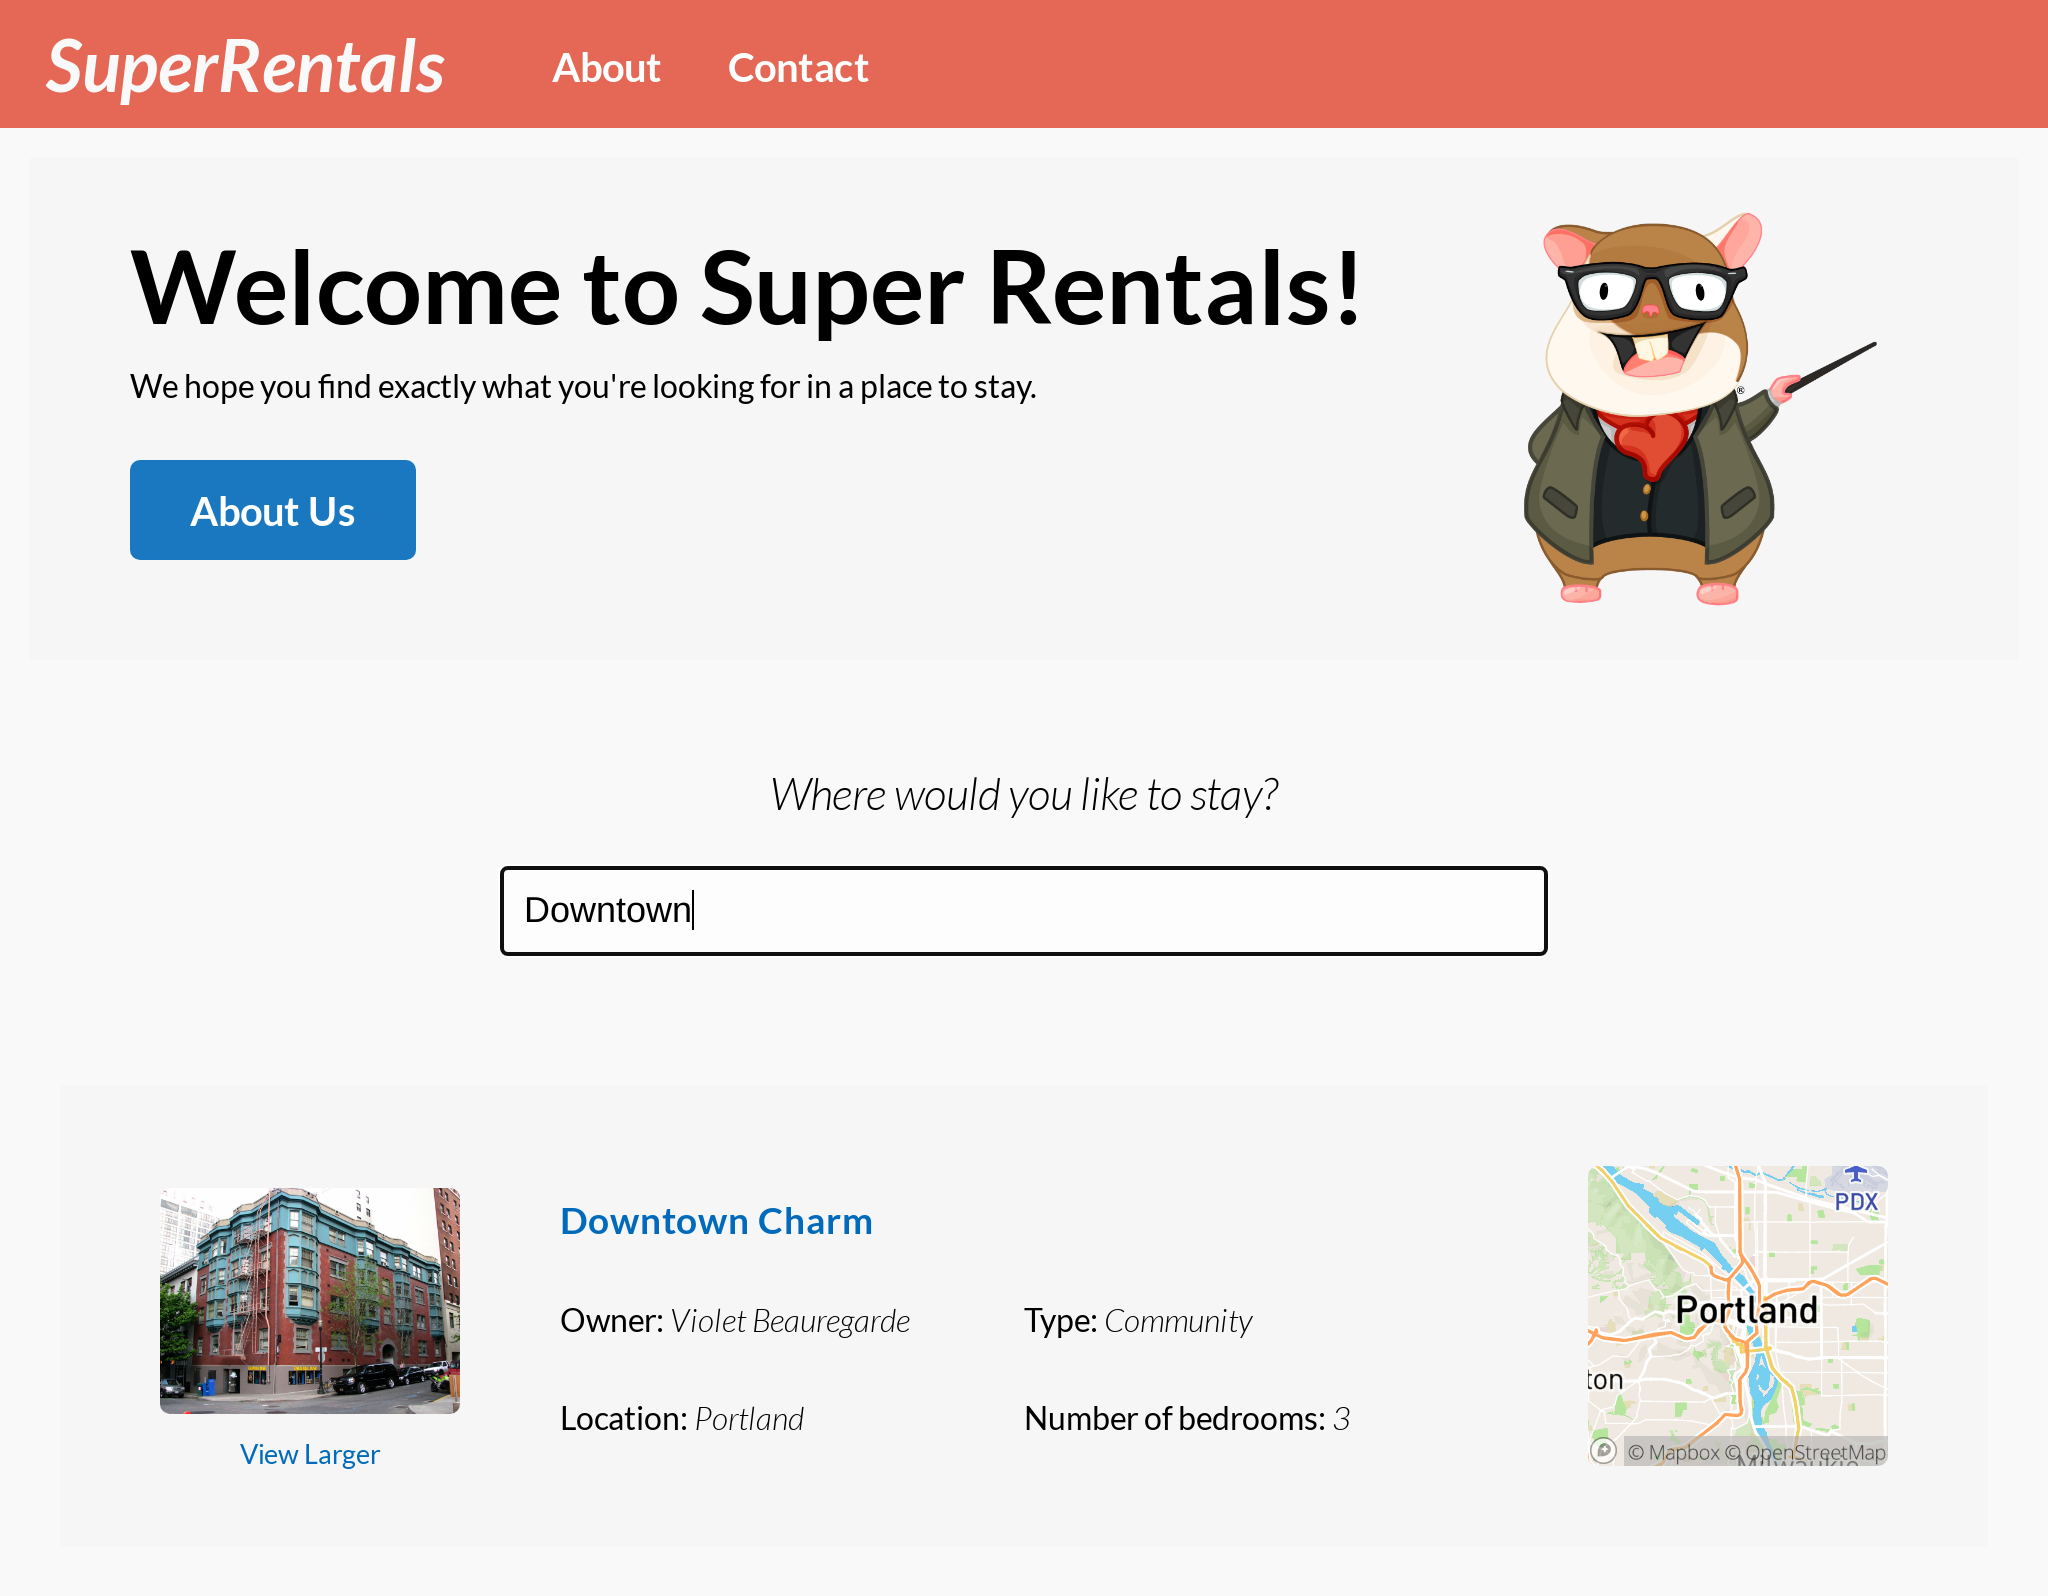 Search functionality in the Super Rentals app